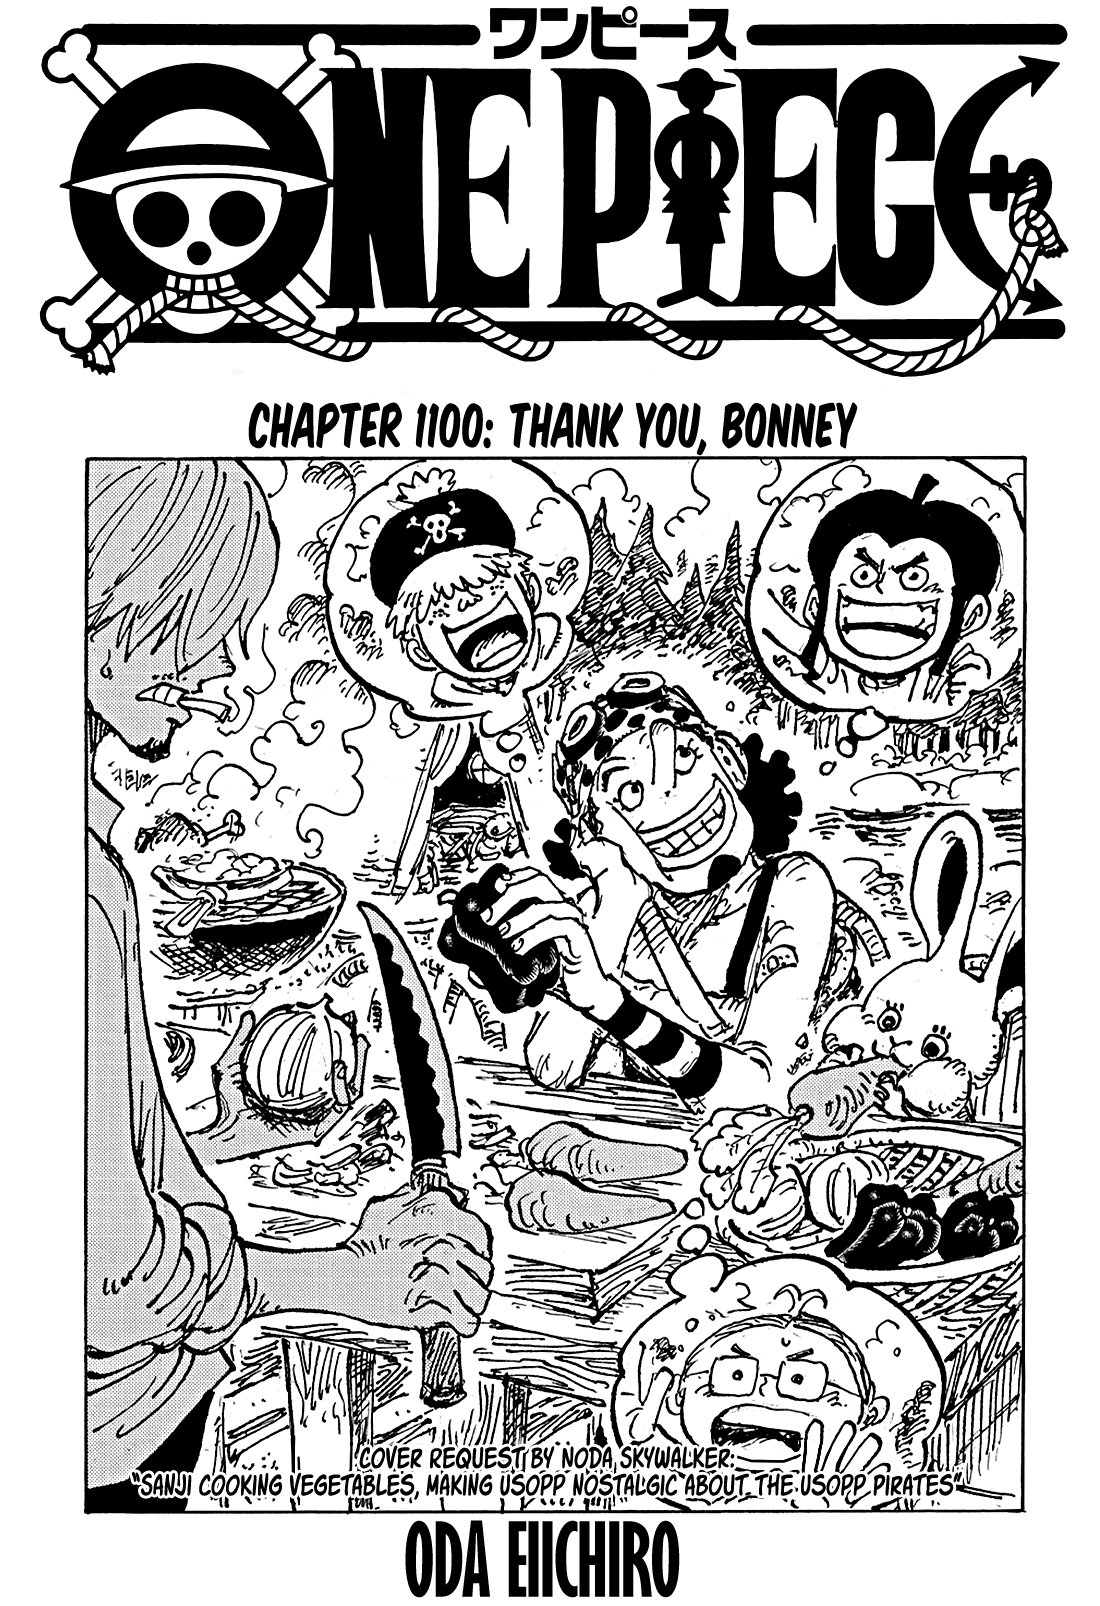 Twitter reacts to One Piece Chapter 1044 raws